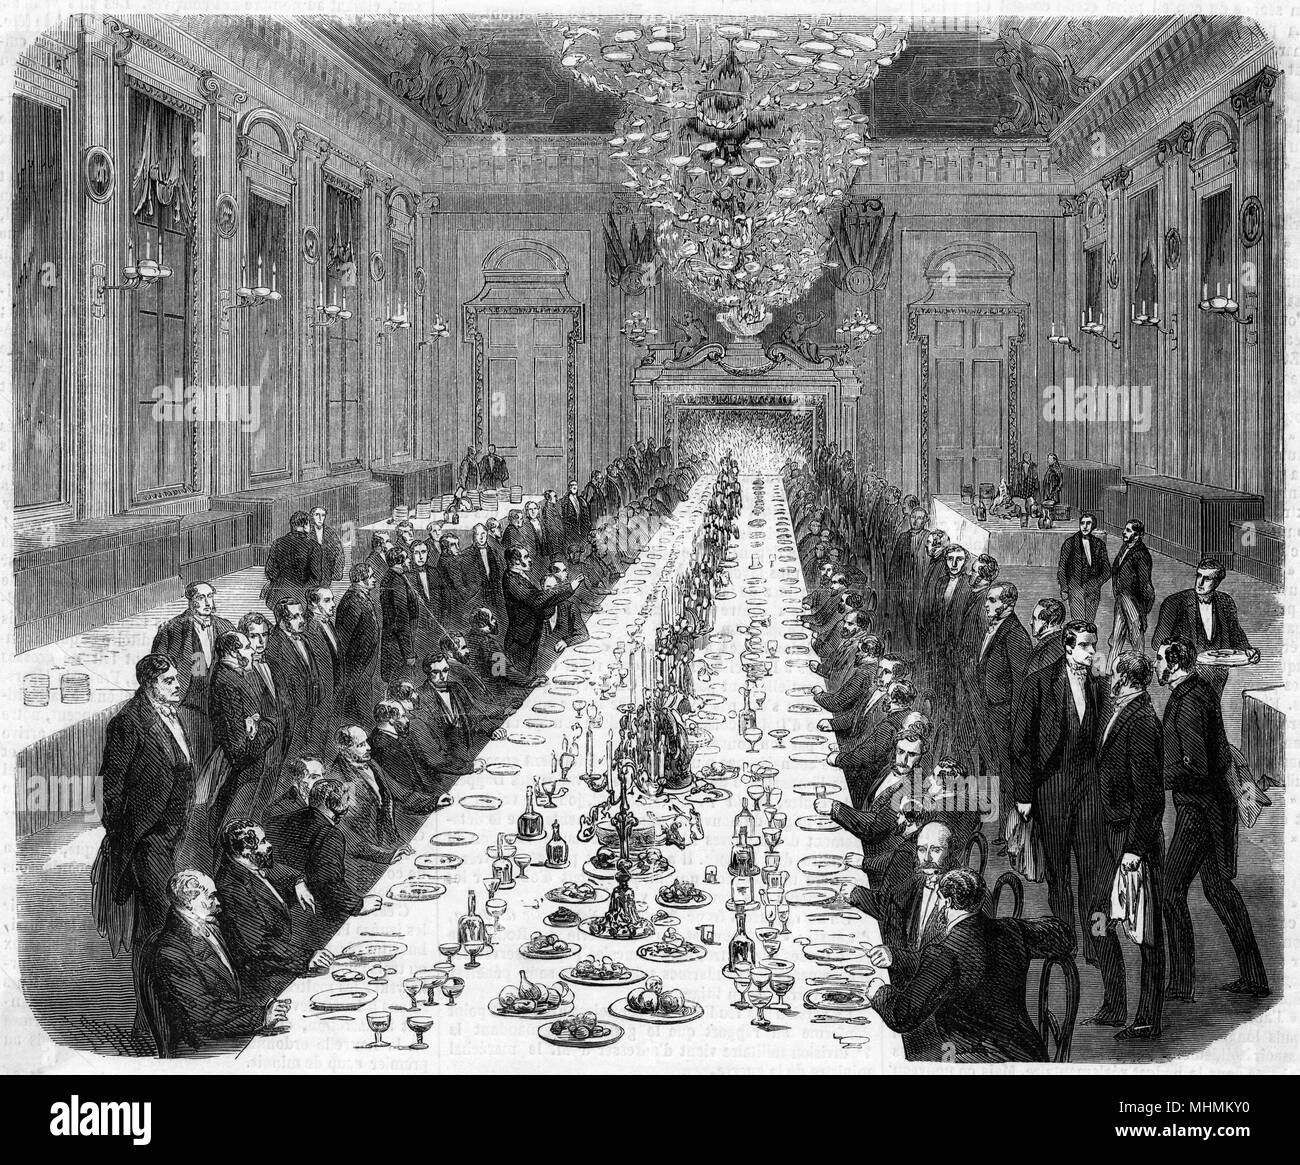 LARGE BANQUET 1861 Stock Photo